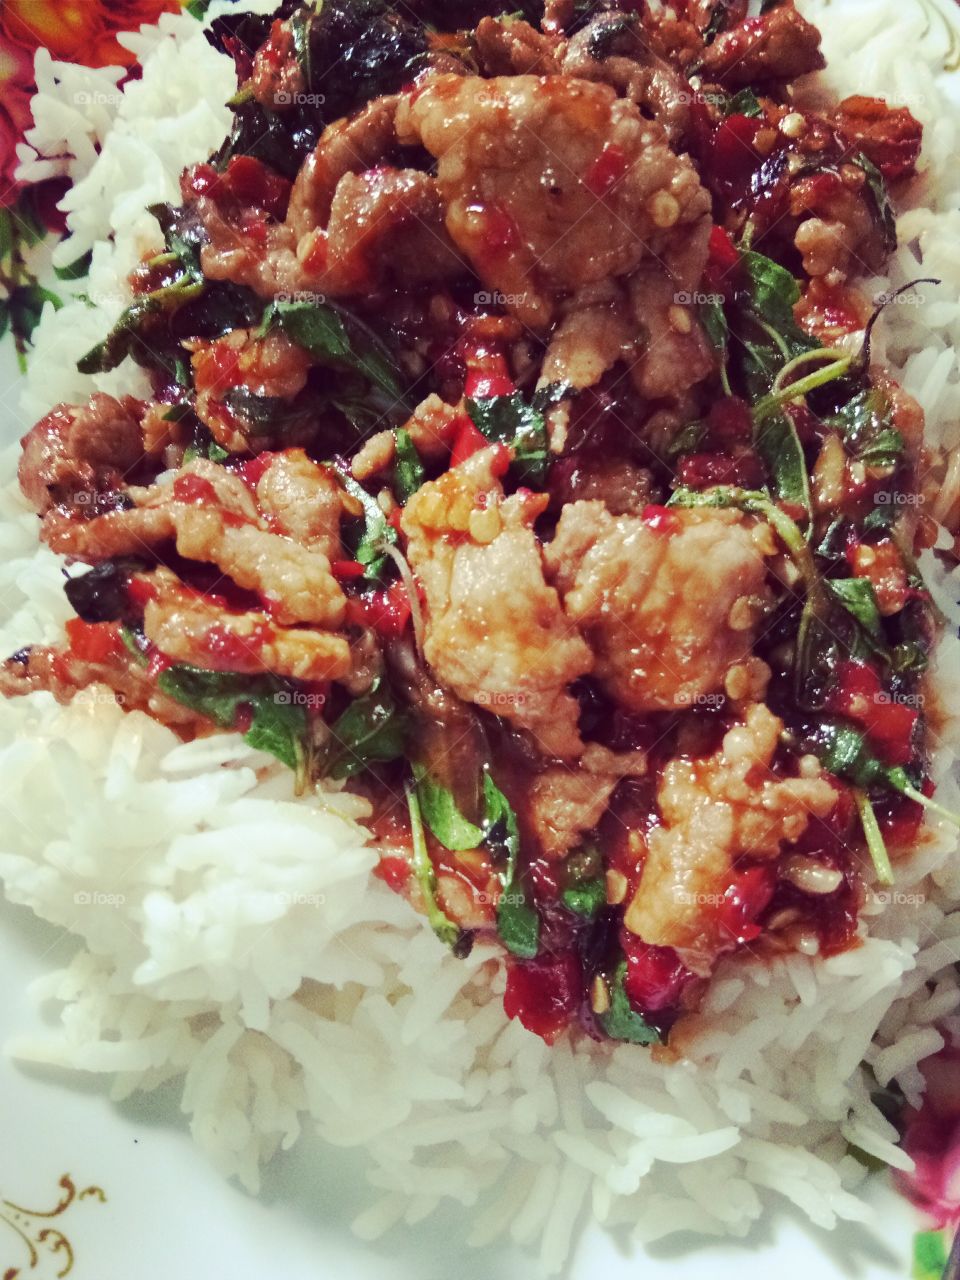 fried stir basil with pork
rice
spicy
delicious